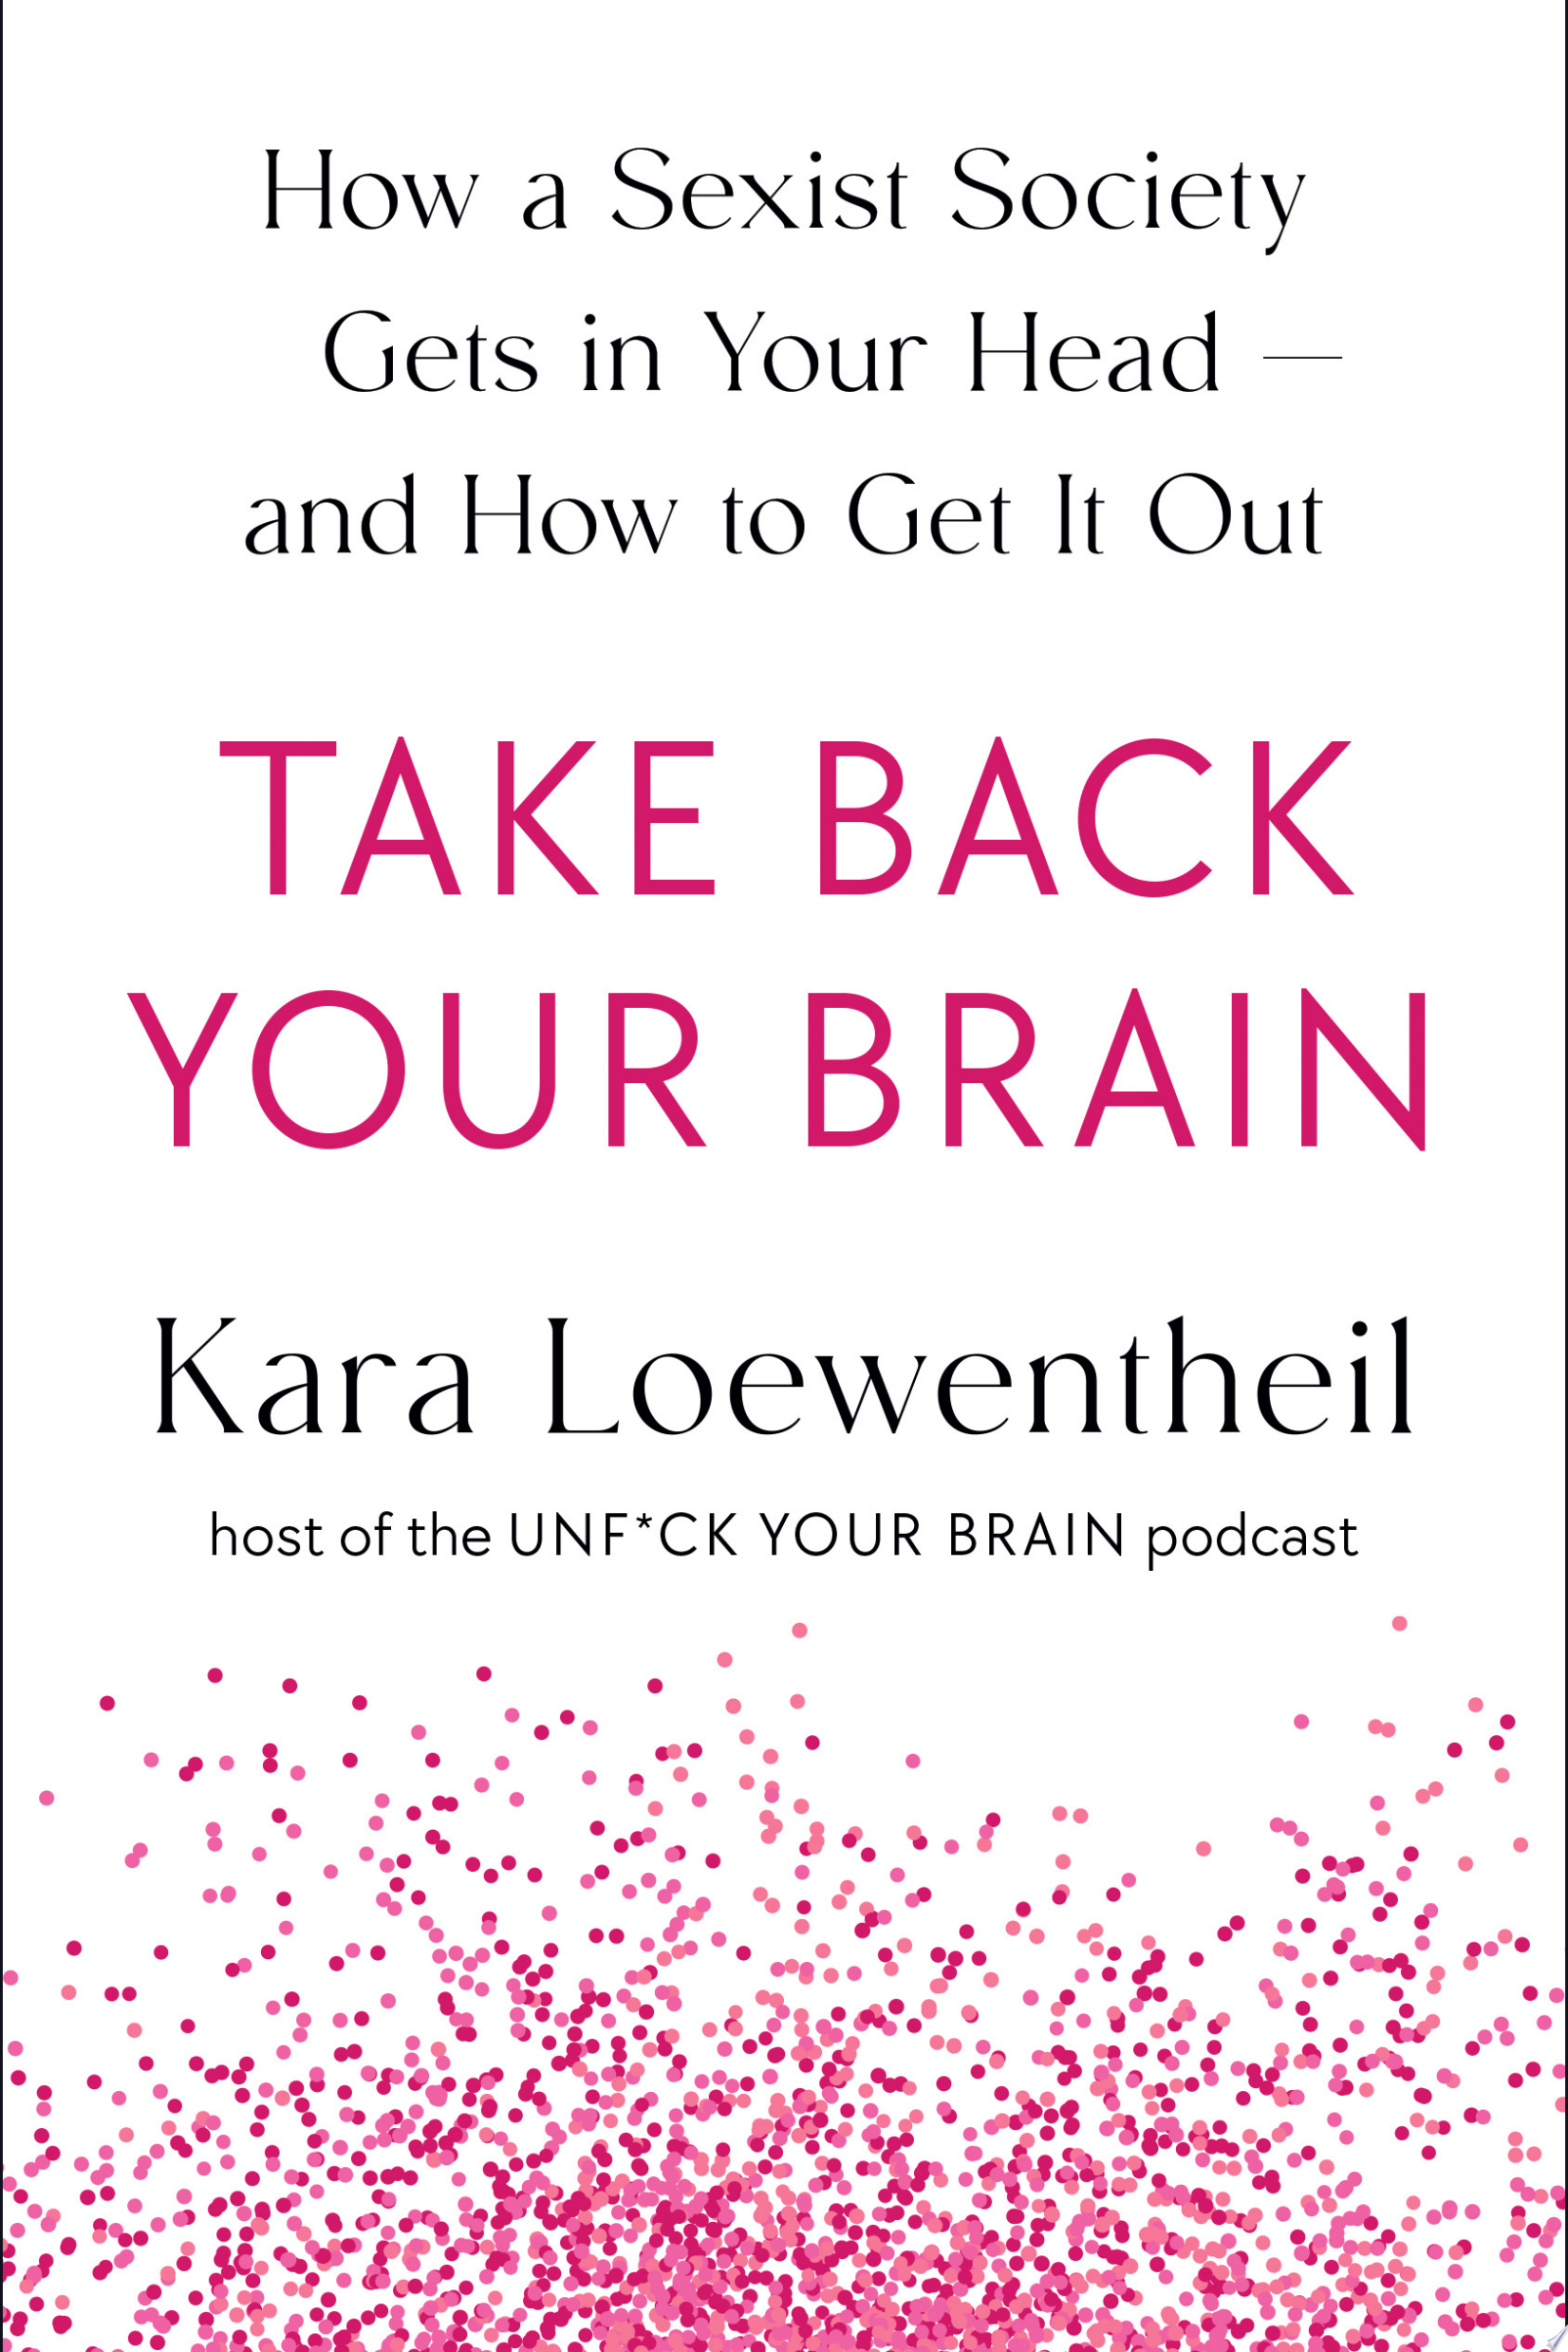 Image for "Take Back Your Brain"